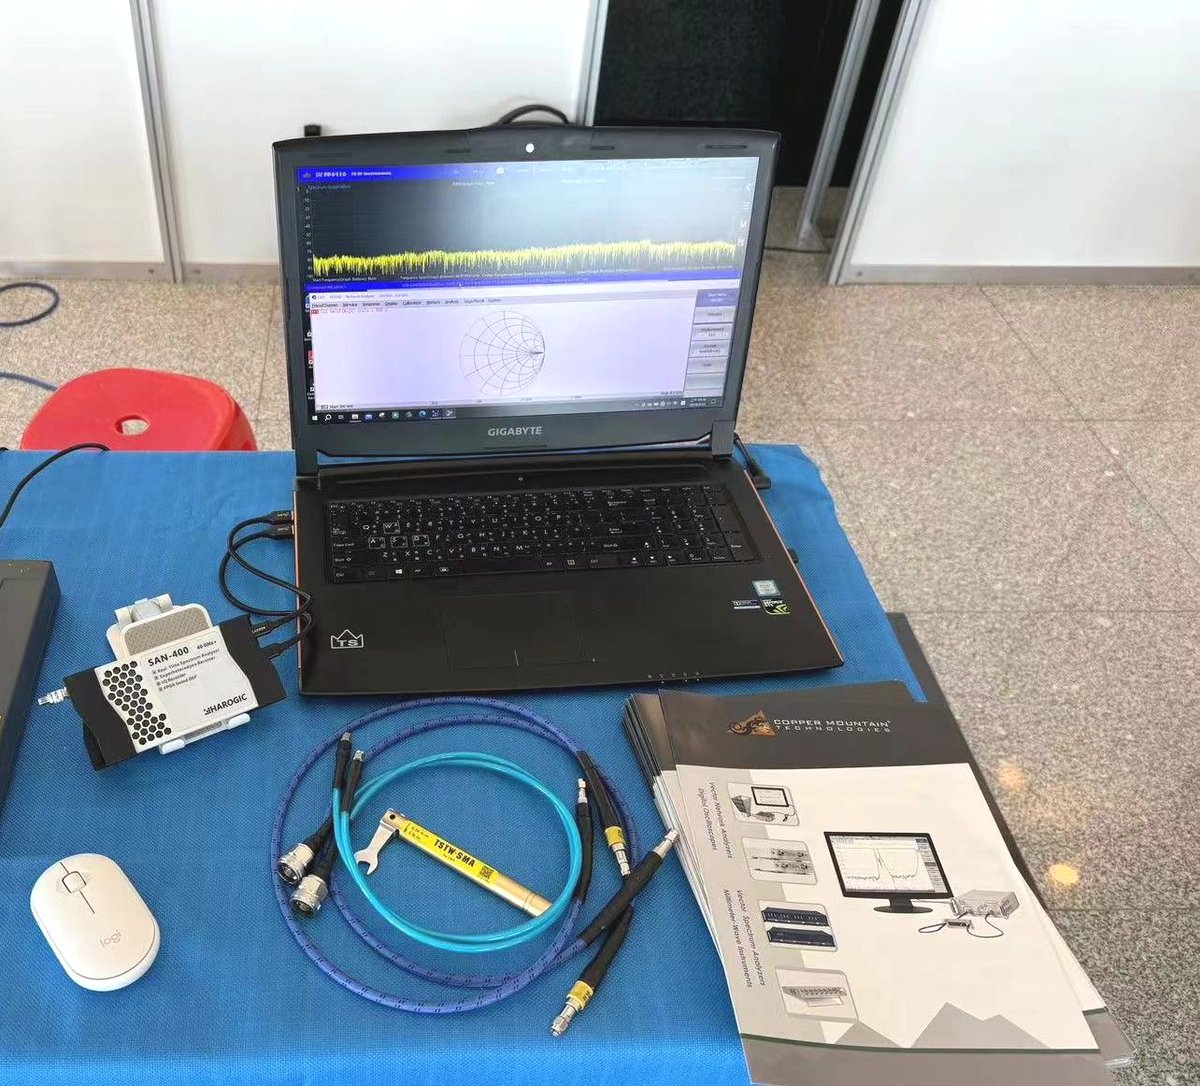 Come and meet our compact #spectrum analyzer. #HAROGIC is attending the MARITIME SATELLITE SEMINAR in Taiwan via our local distributor TS RF INSTRUMENT. #test #measurement